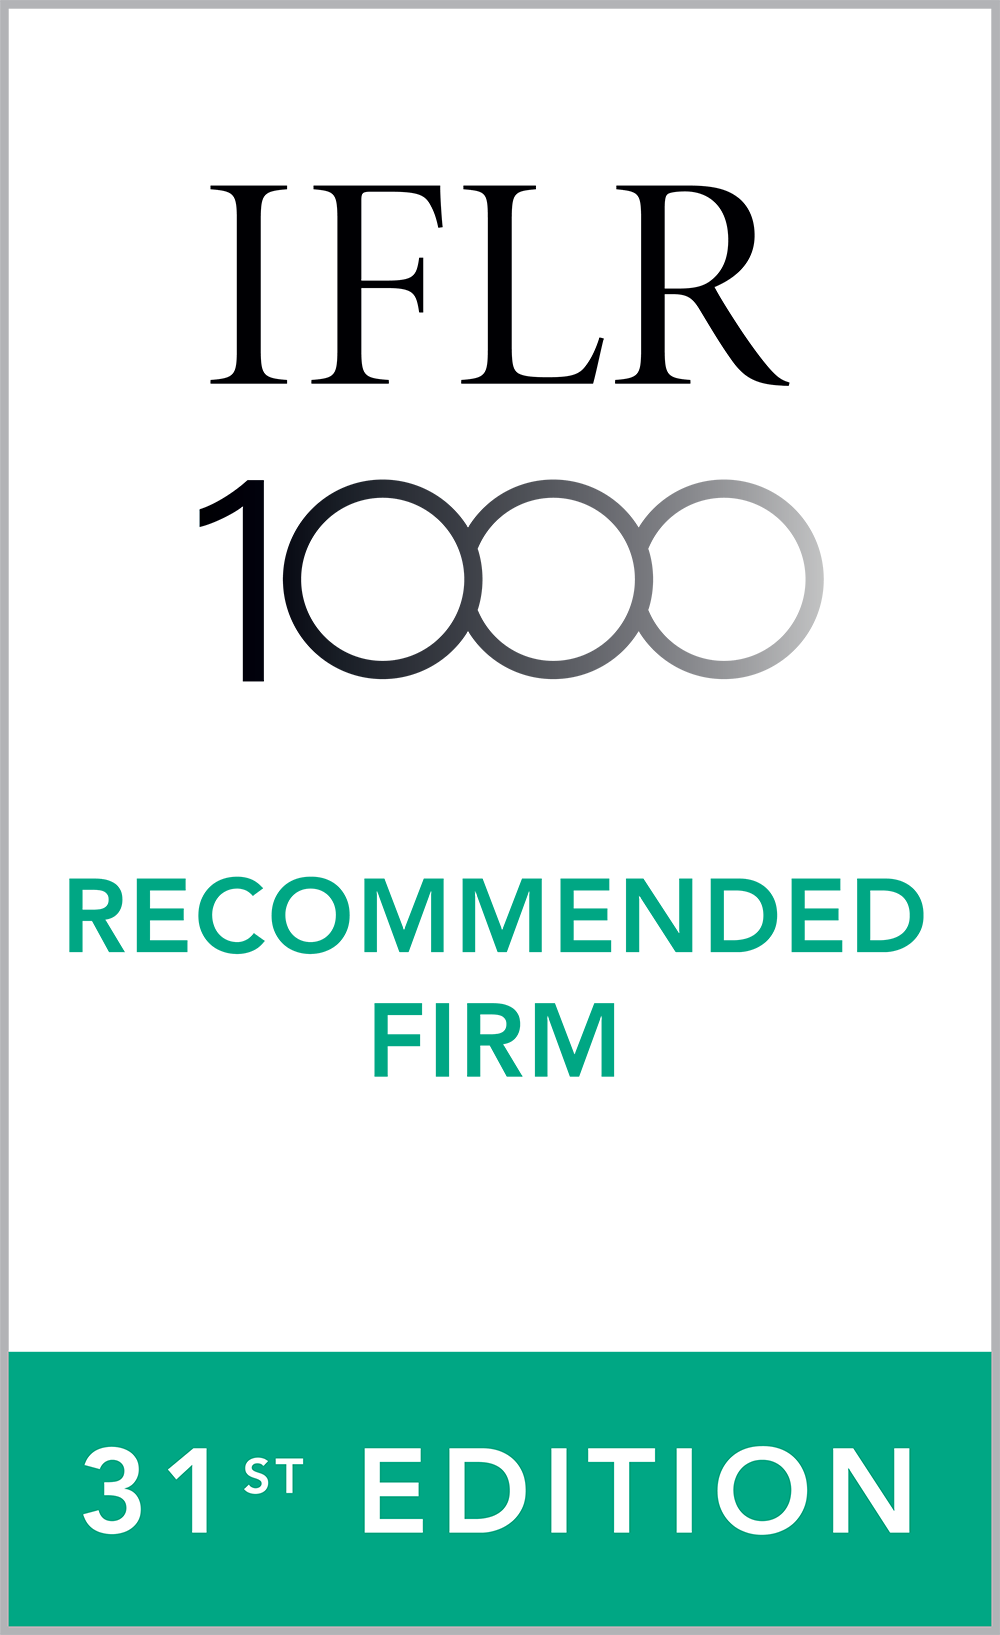 Recommended firm 31st edition 2021